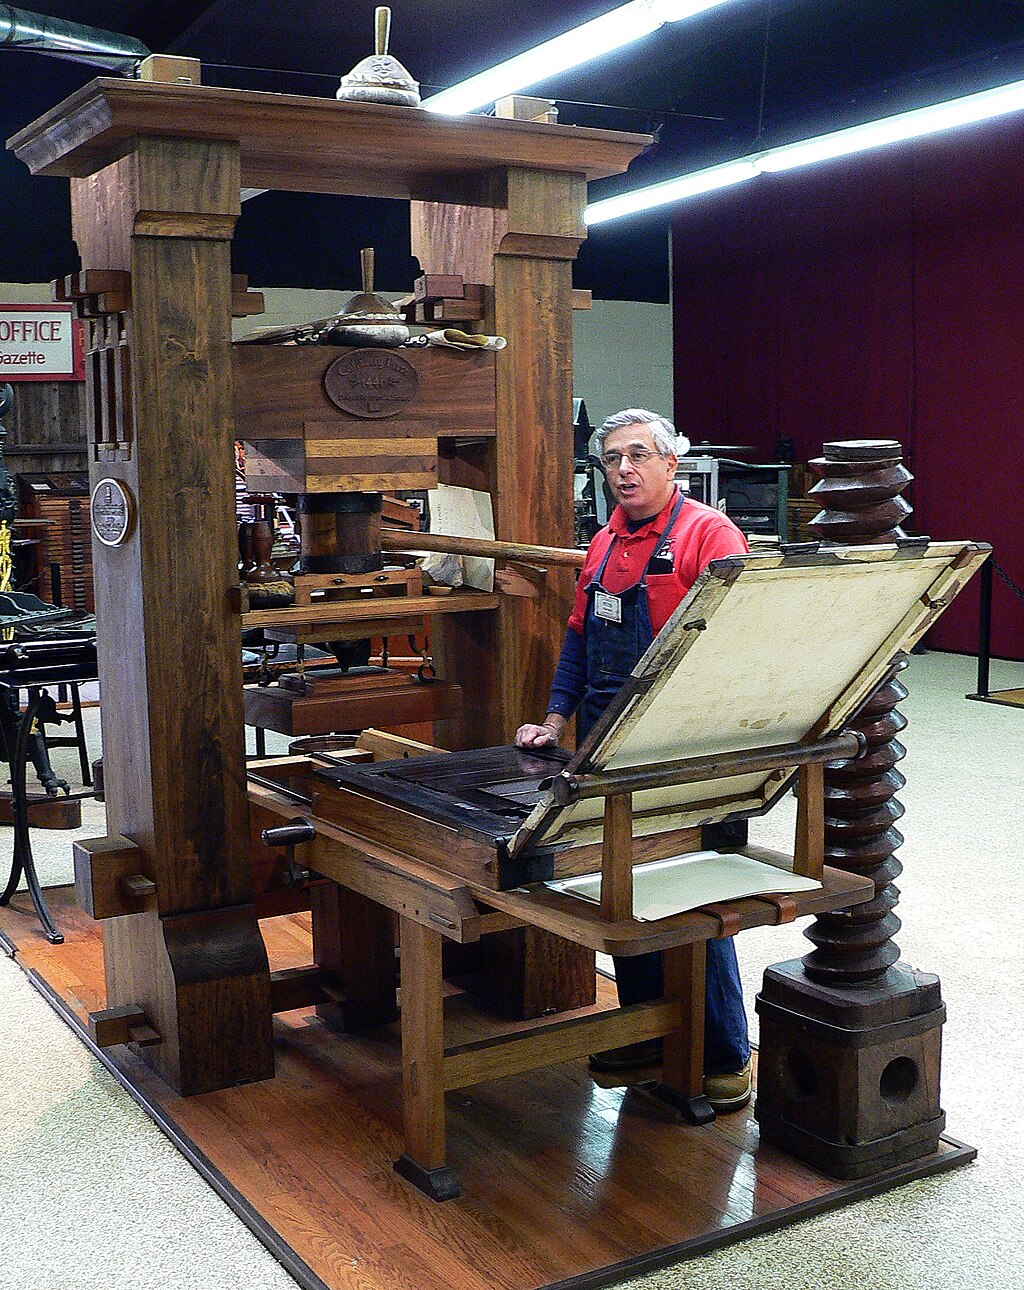 The Printing Press Changed the World - Fact or Myth?